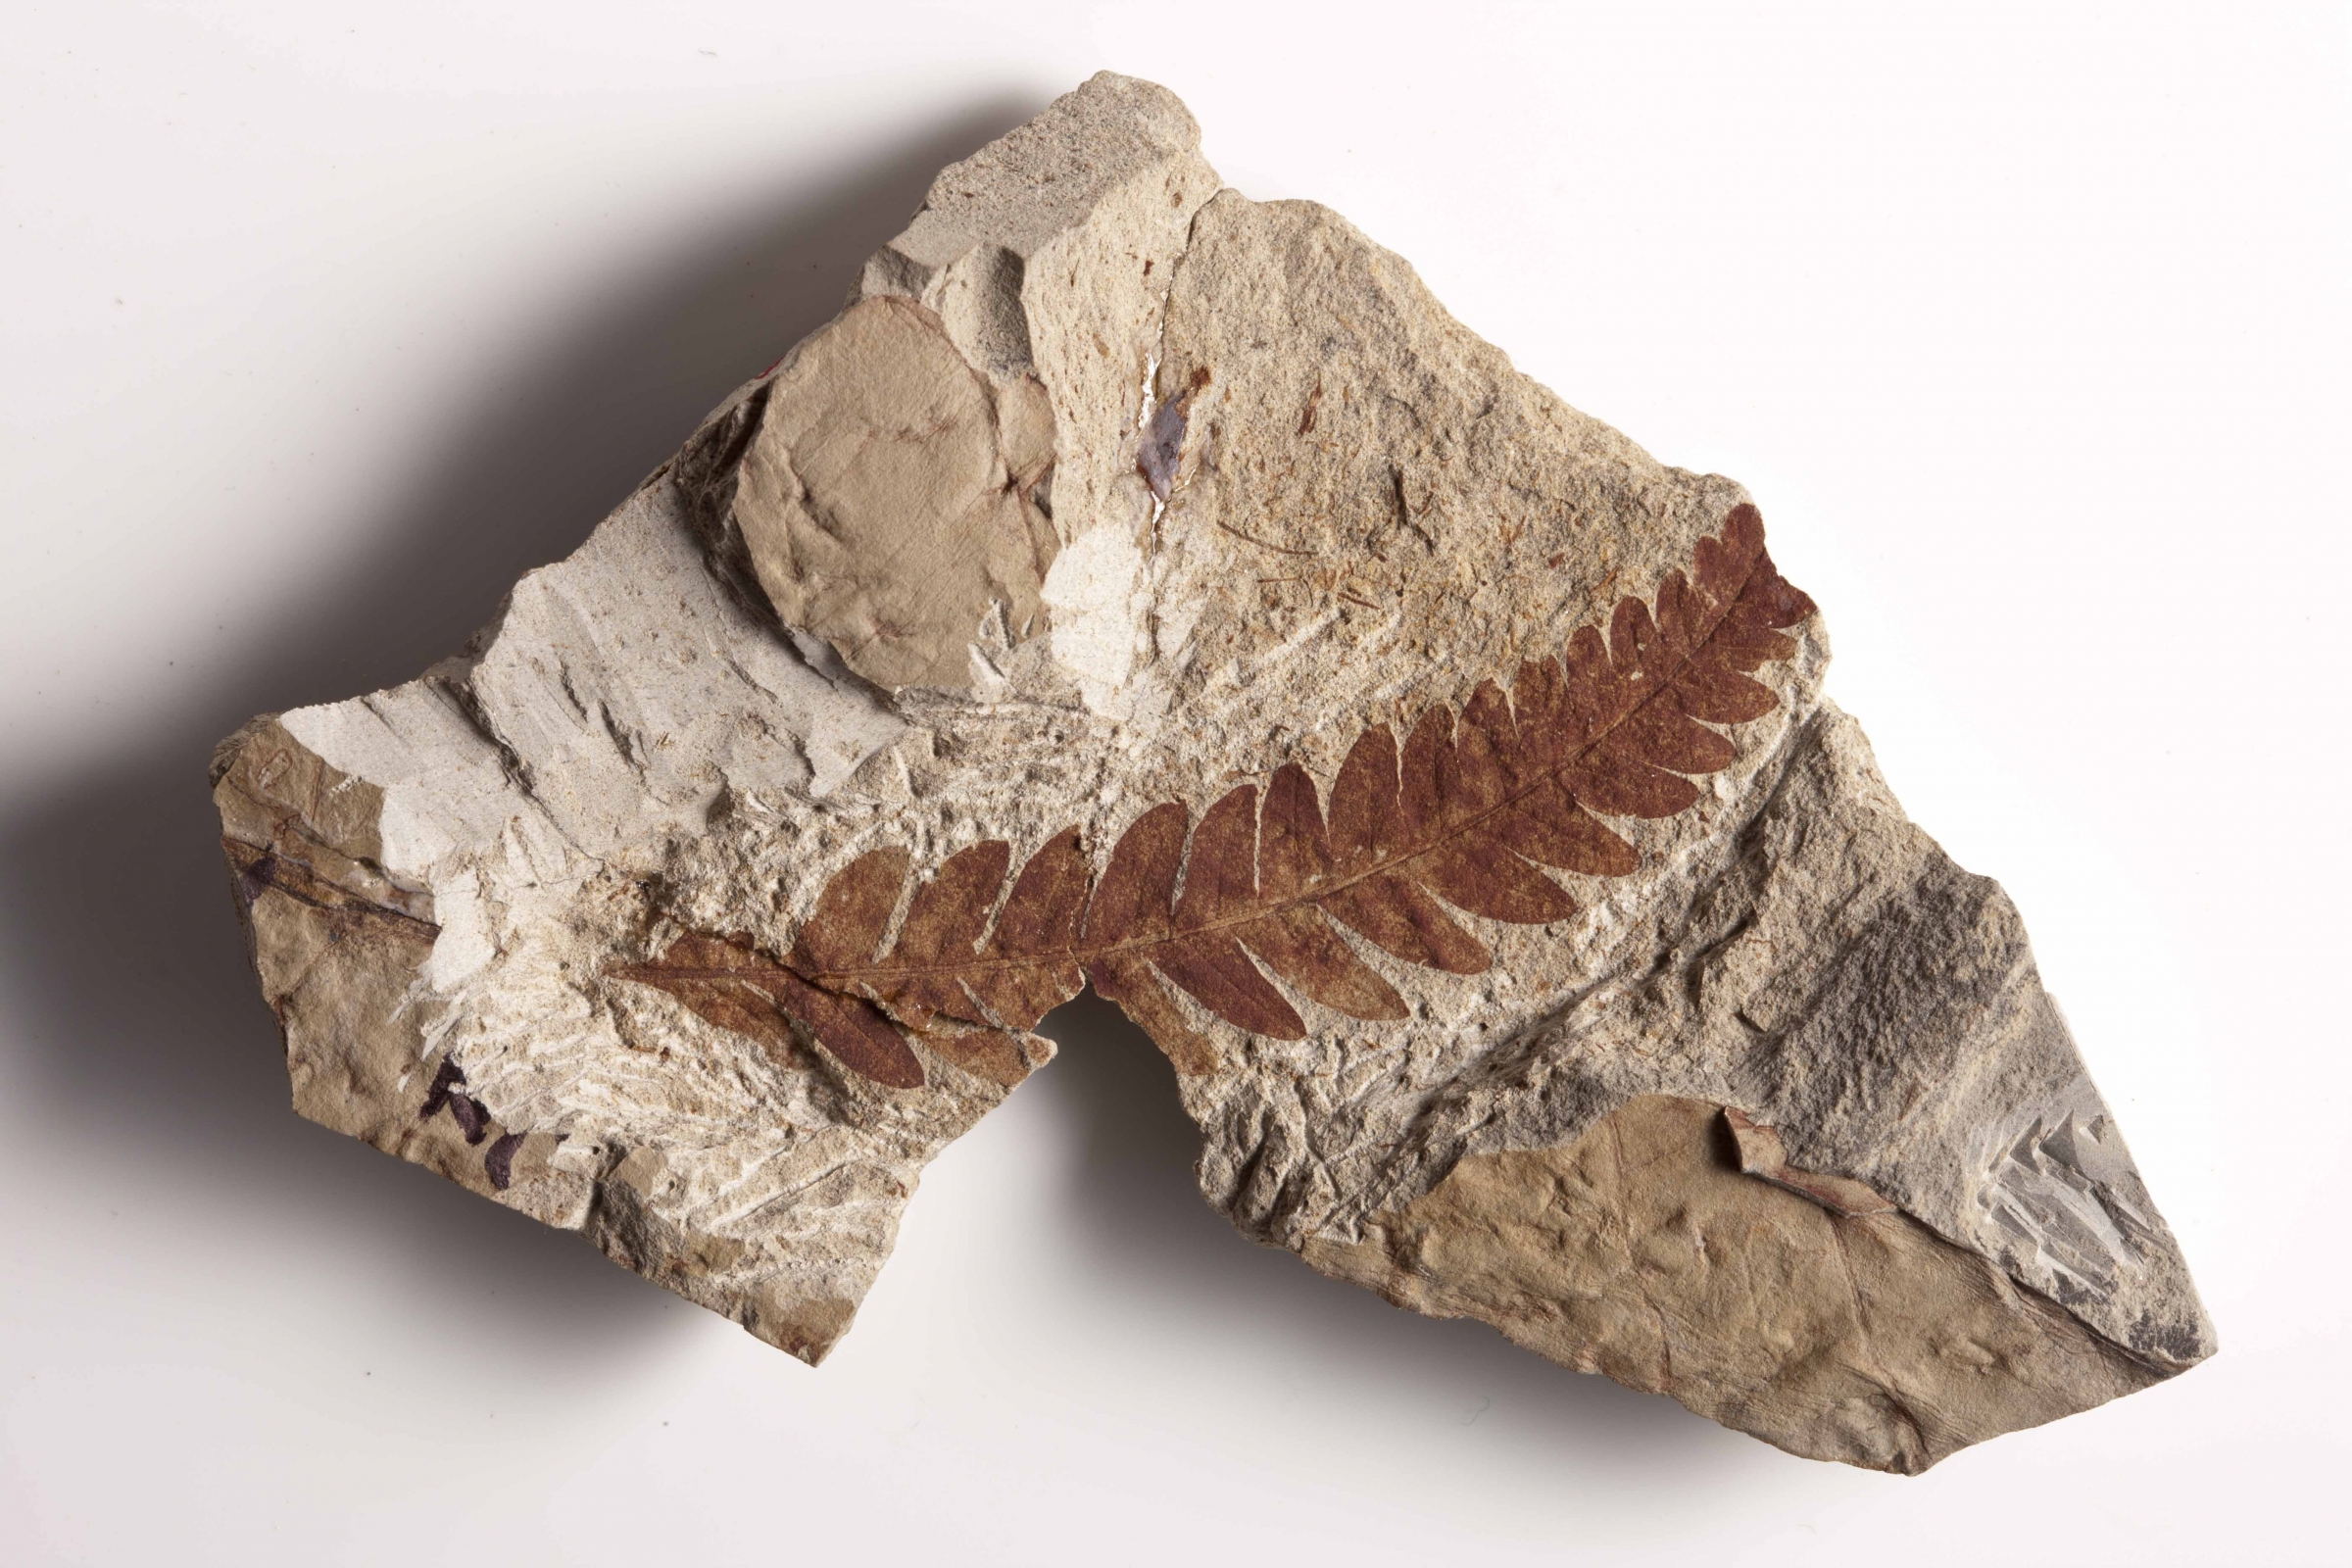 A Rhus-like leaf fossil from the PETM related to the sumac. The 55.8 million year old leaf fossil is from the collection of Scott Wing at The Smithsonian Institute in Washington, D.C.